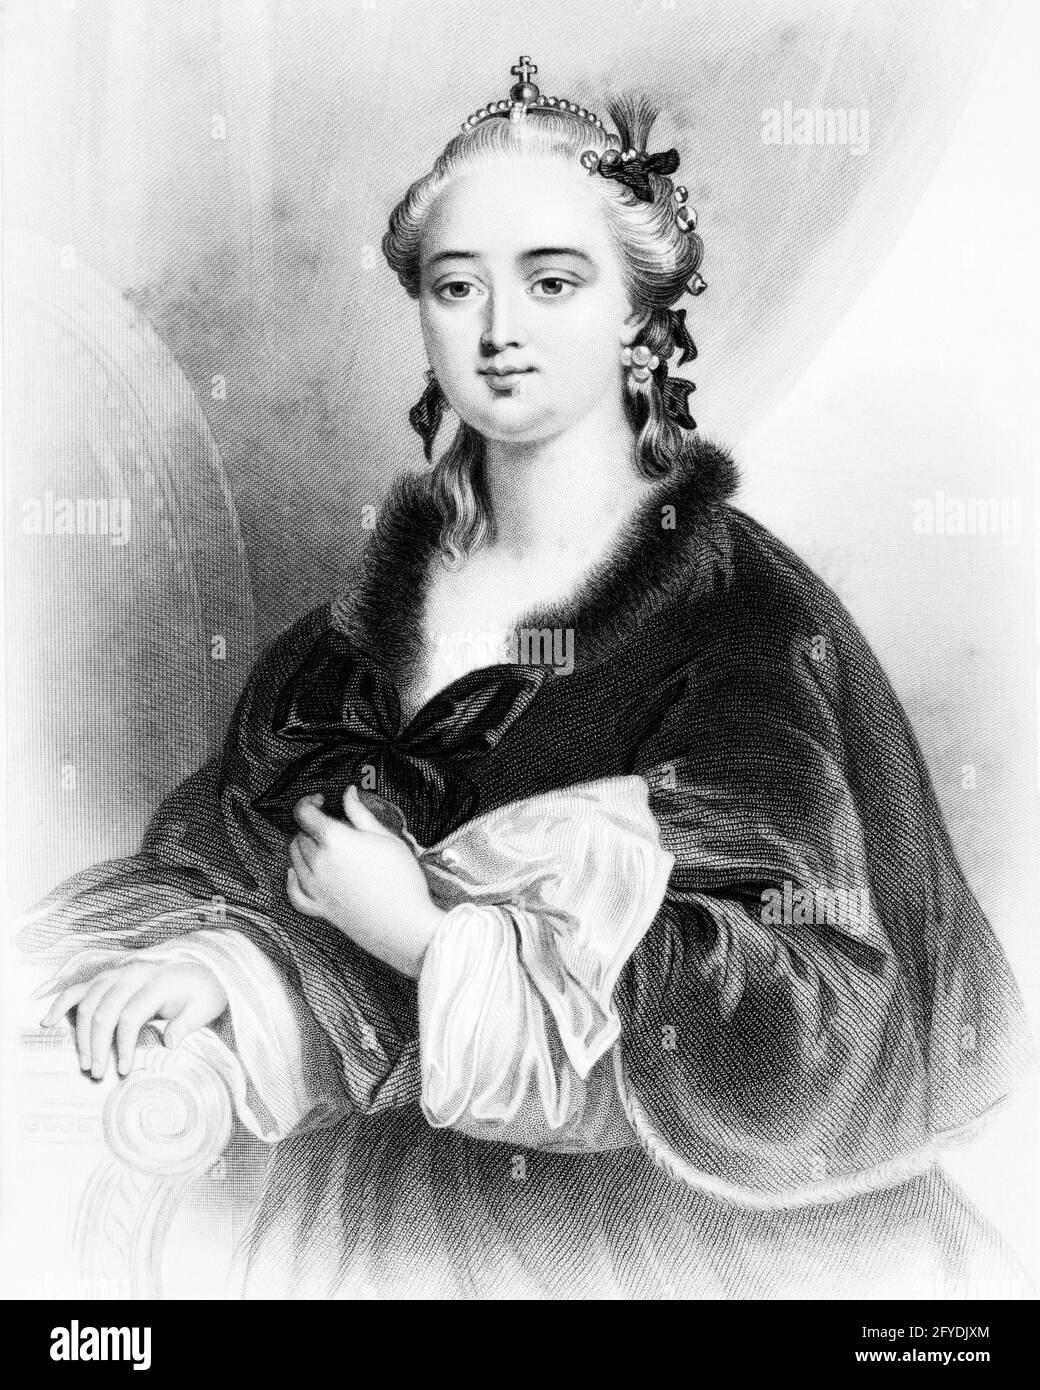 1700s PORTRAIT OF CATHERINE THE GREAT EMPRESS OF RUSSIA CATHERINE II RULED DURING THE GOLDEN AGE OF RUSSIA - q53188 CPC001 HARS CAUCASIAN ETHNICITY OLD FASHIONED Stock Photo